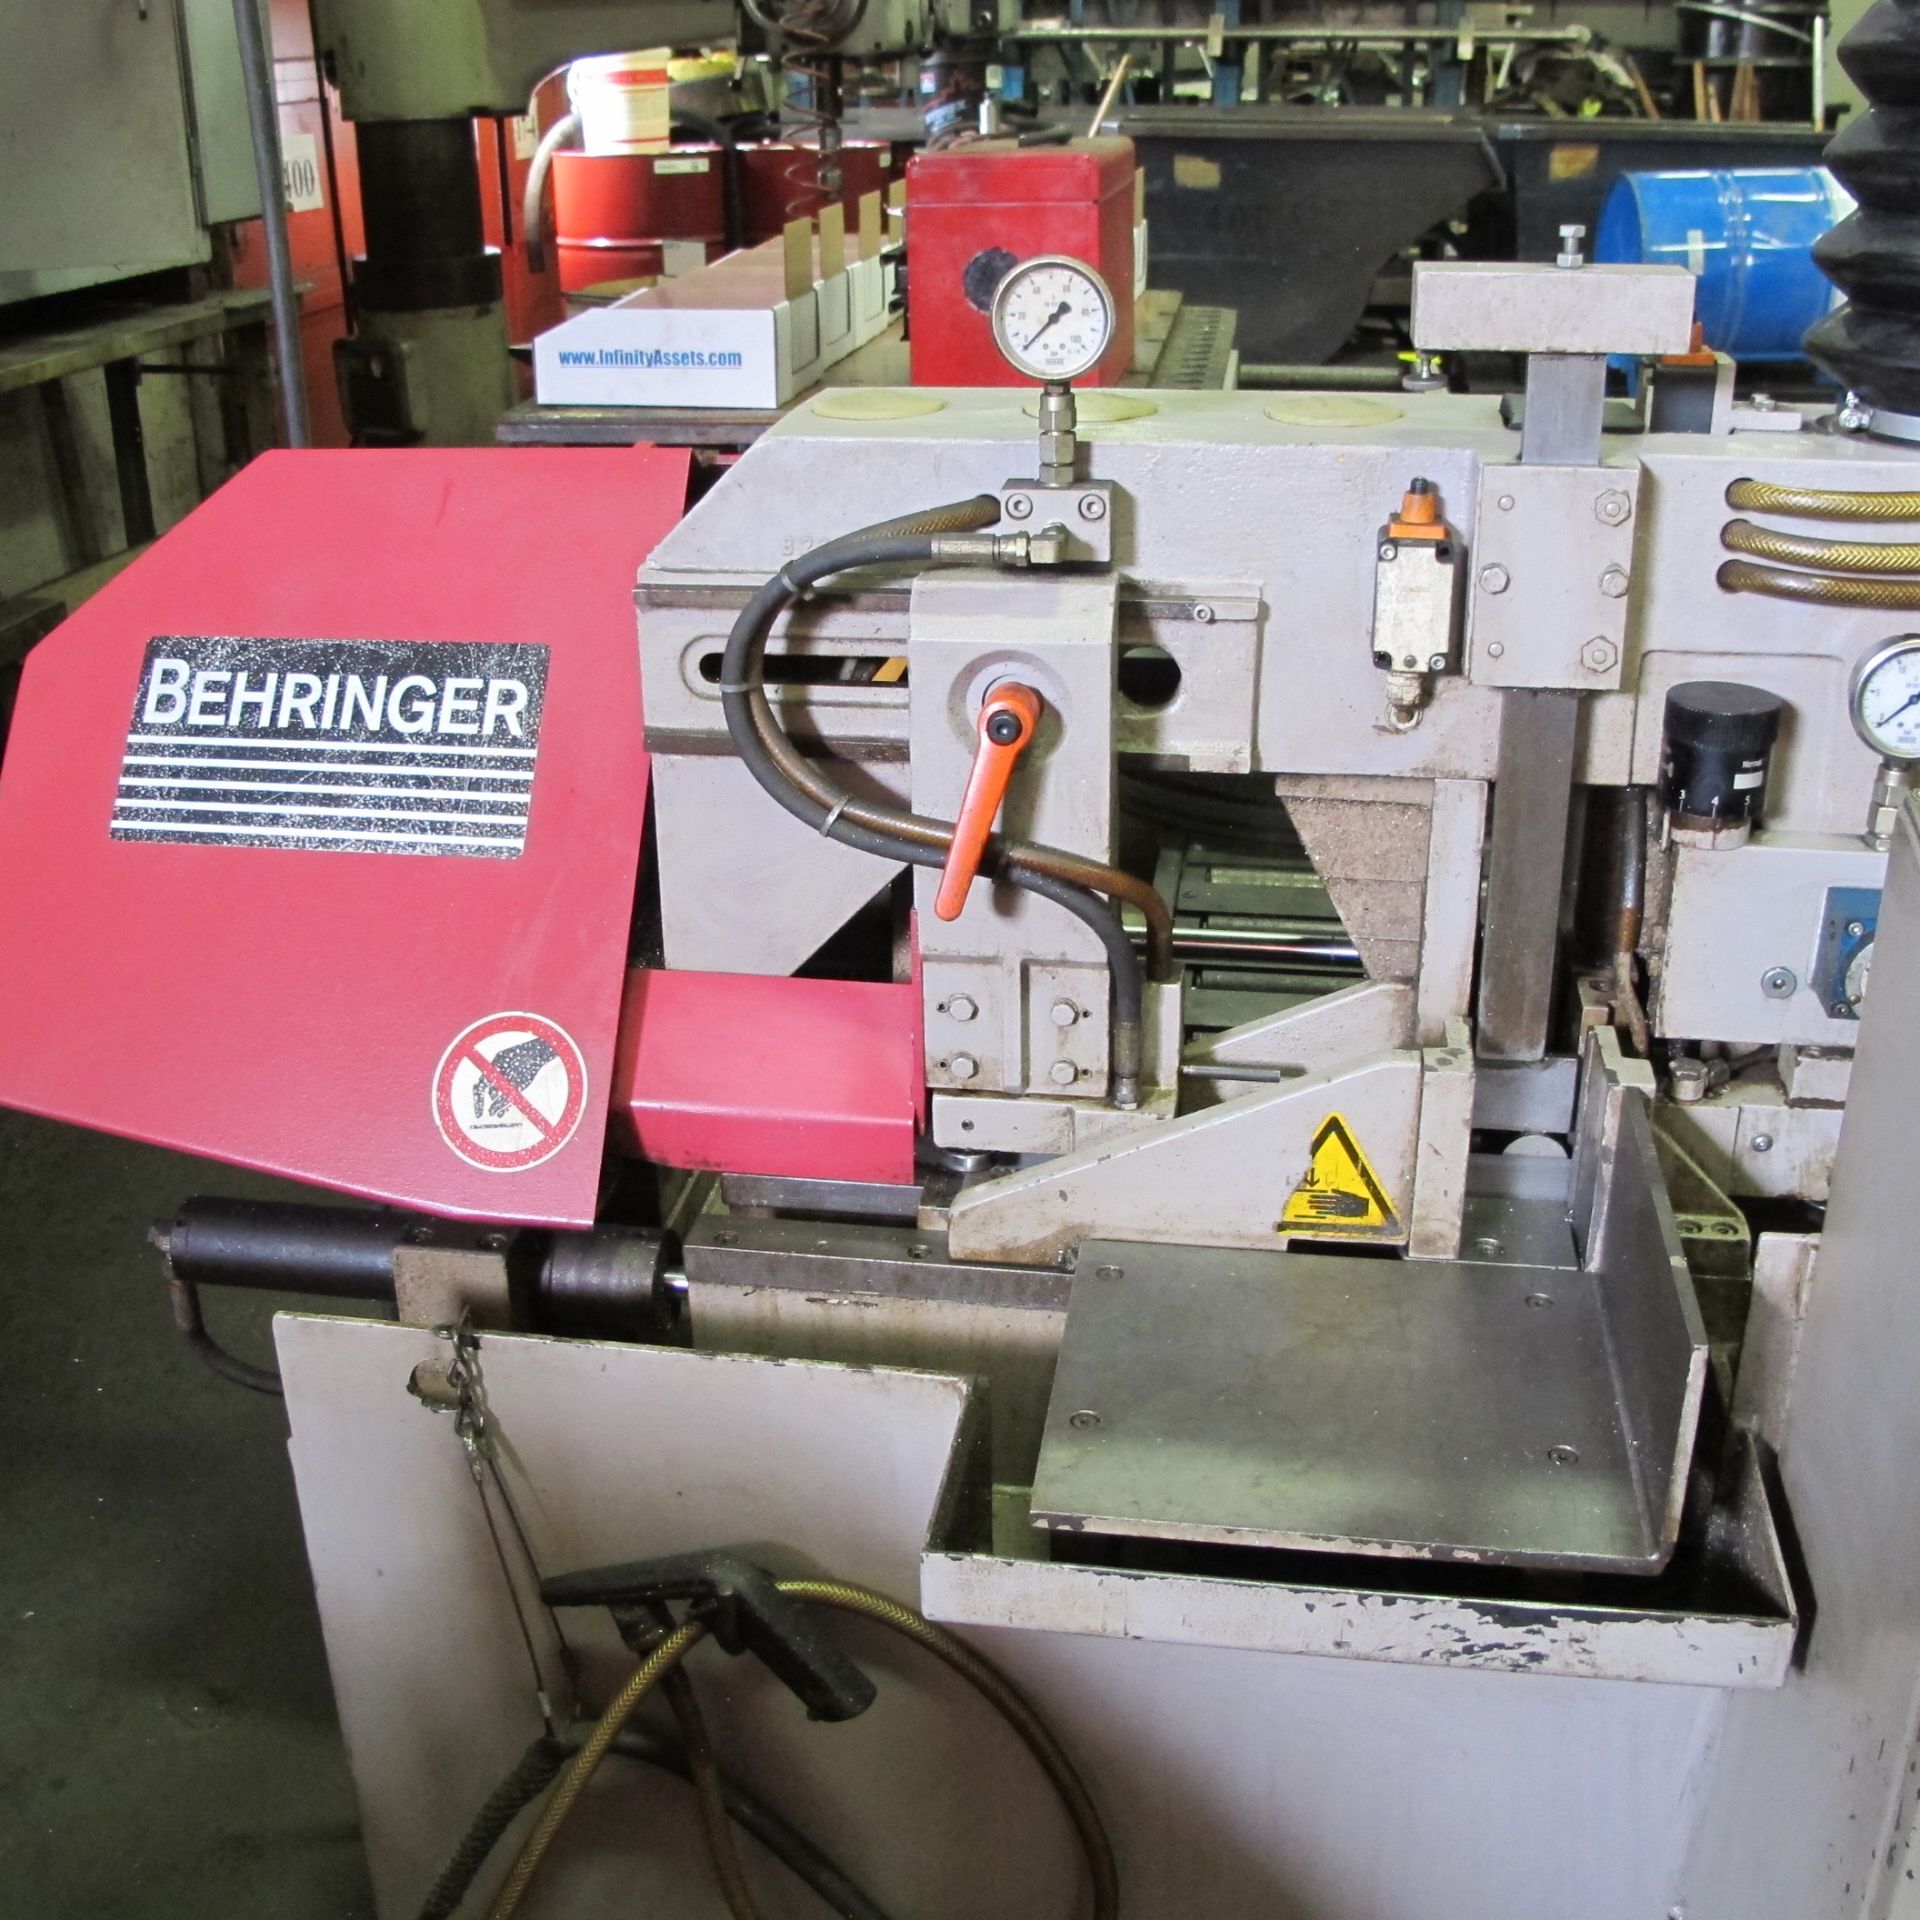 BEHRINGER MODEL HBB-221 HORIZONTAL BANDSAW, AUTO CLAMP, S/N 17814 (RIGGING FEE $300) - Image 7 of 15